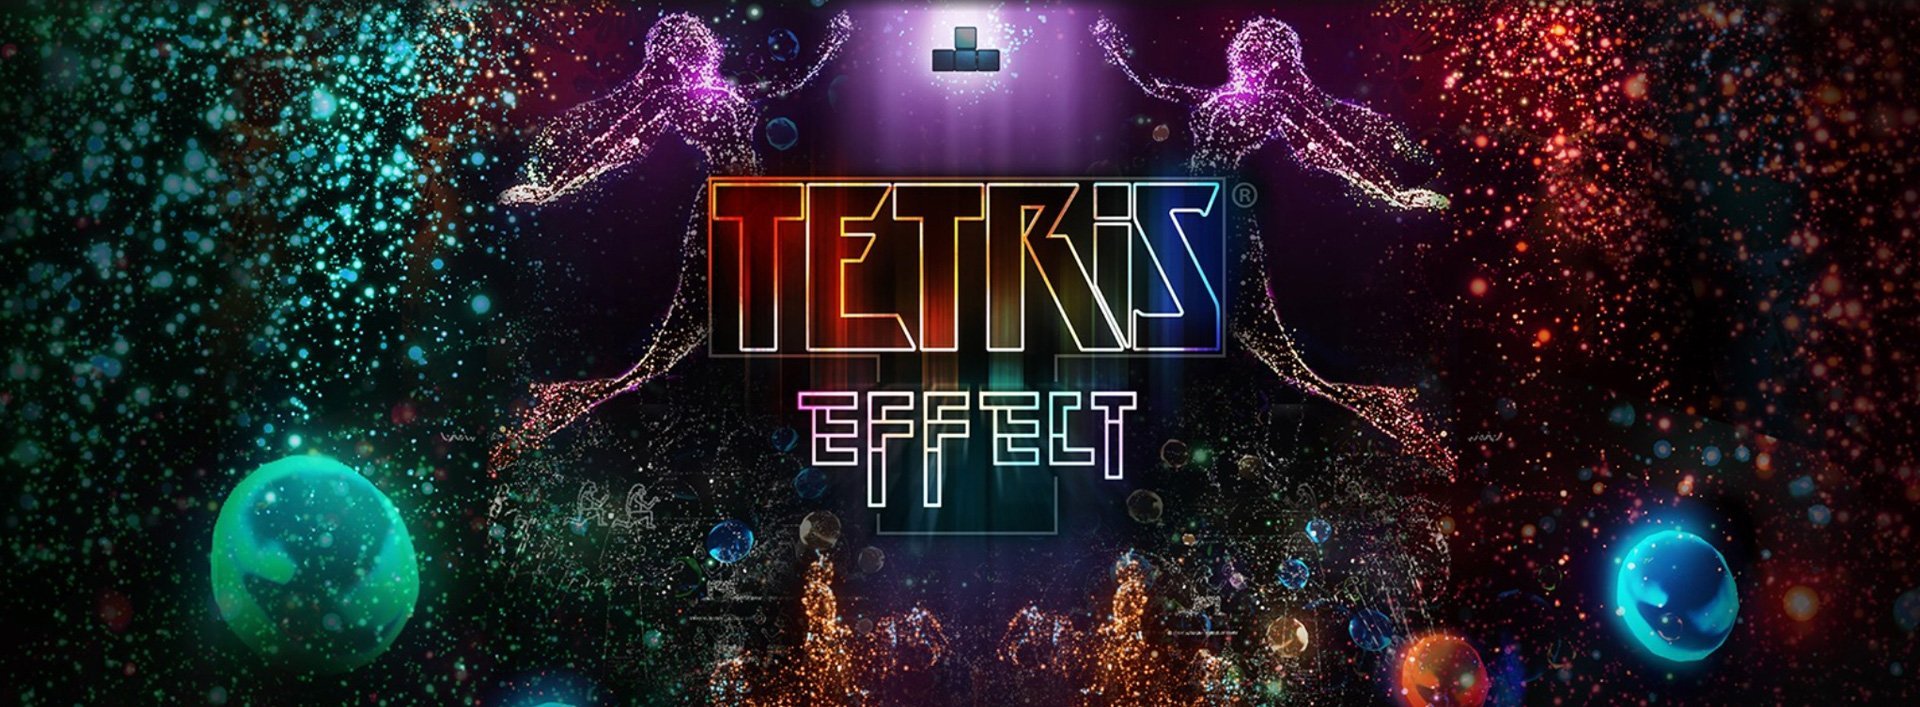 Tetris Effect is Now Available on Oculus Quest